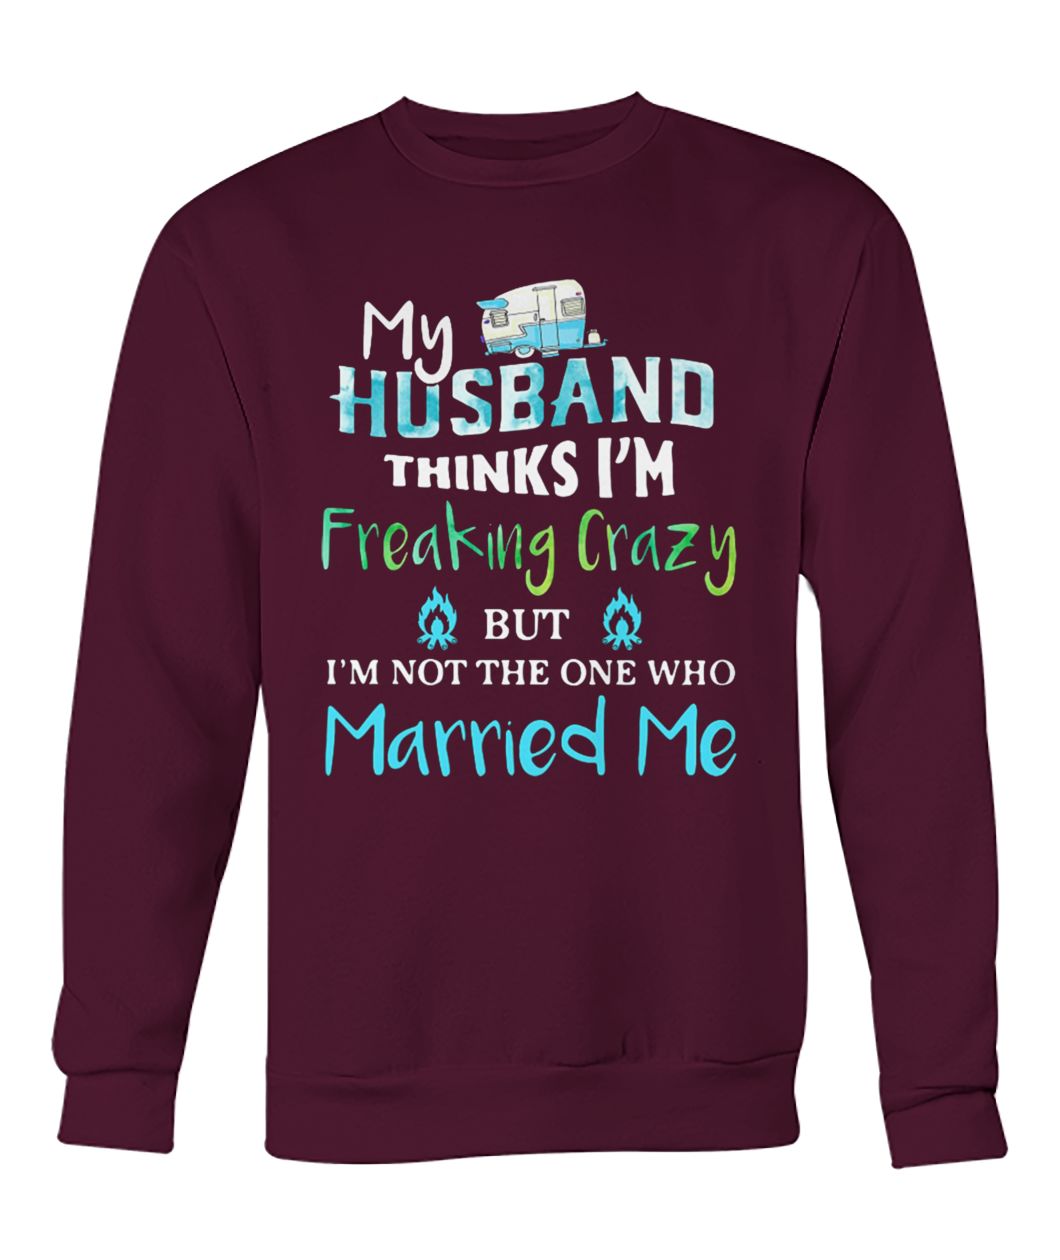 Camping my husband thinks I'm crazy but I'm not the one who married me crew neck sweatshirt